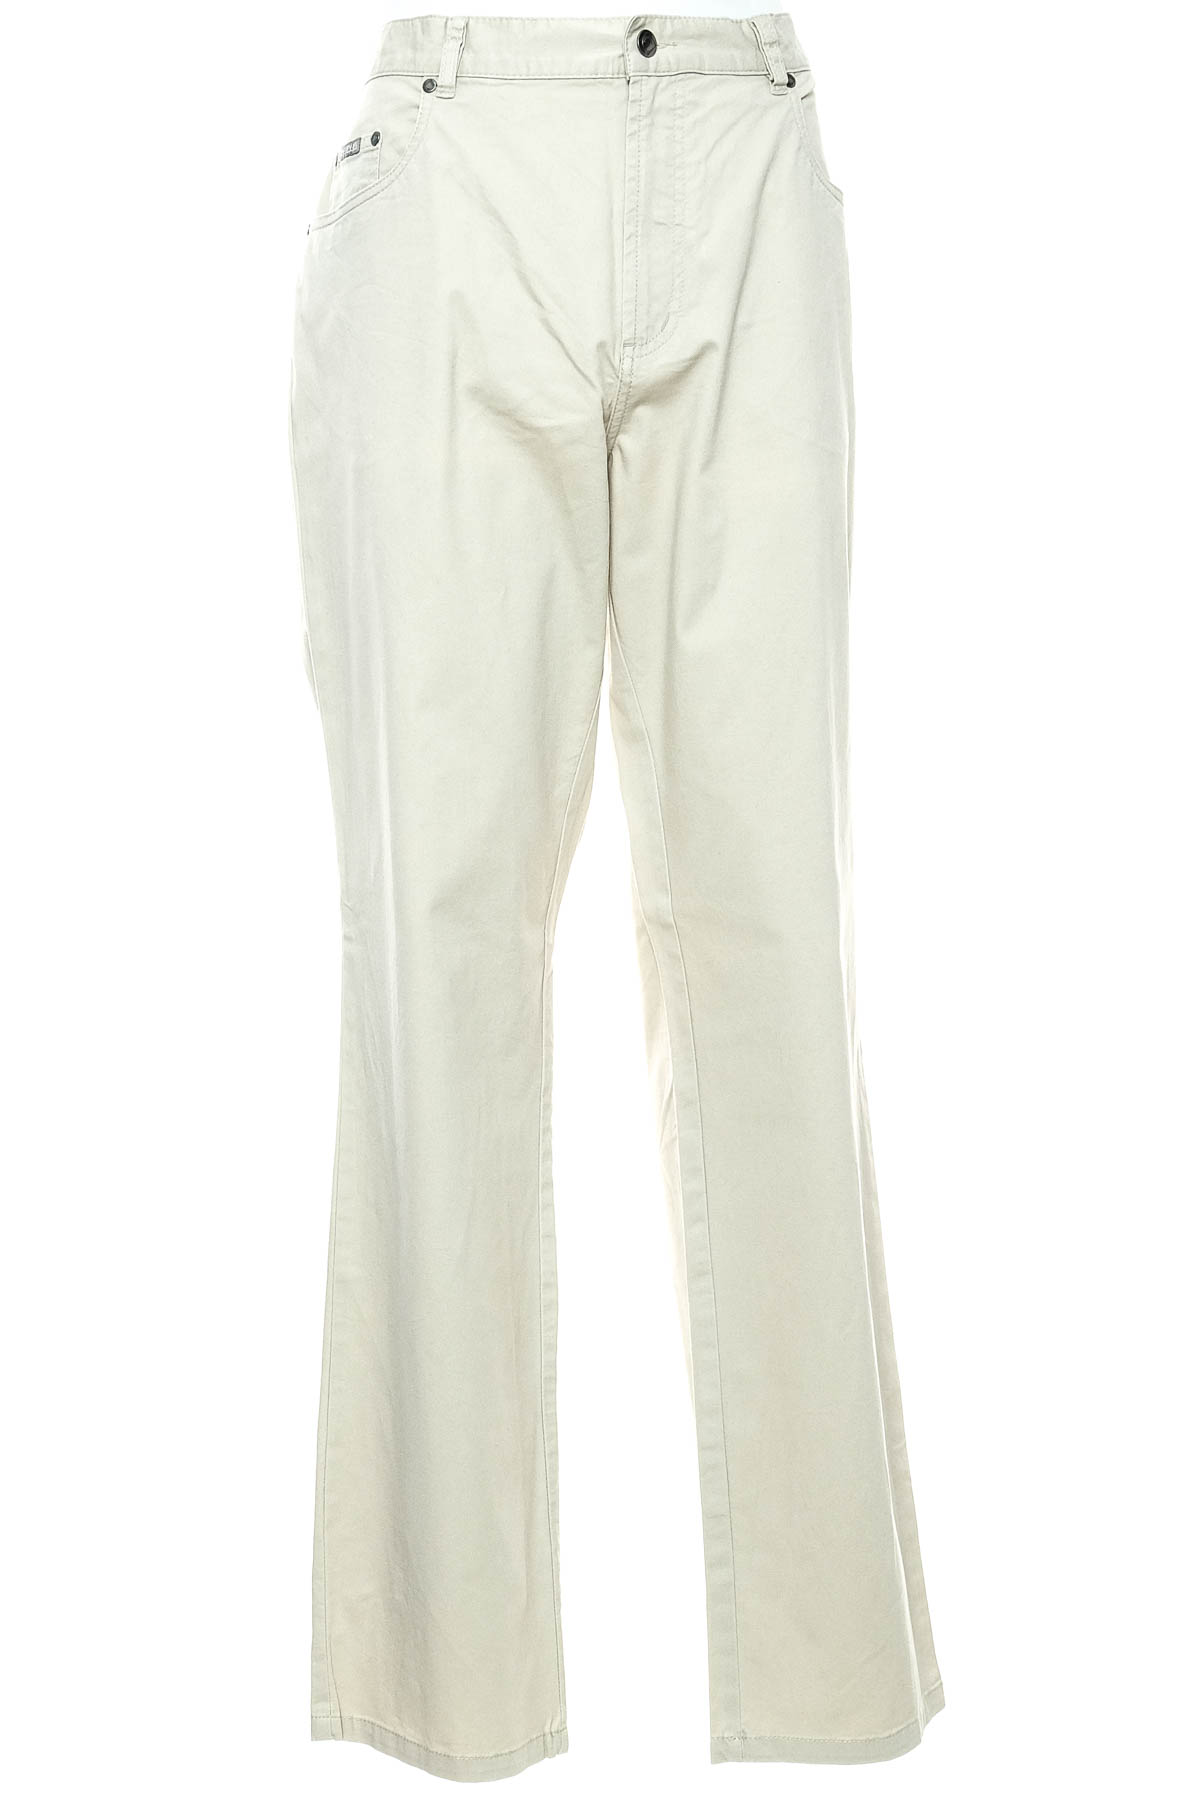 Men's trousers - Redpoint - 0